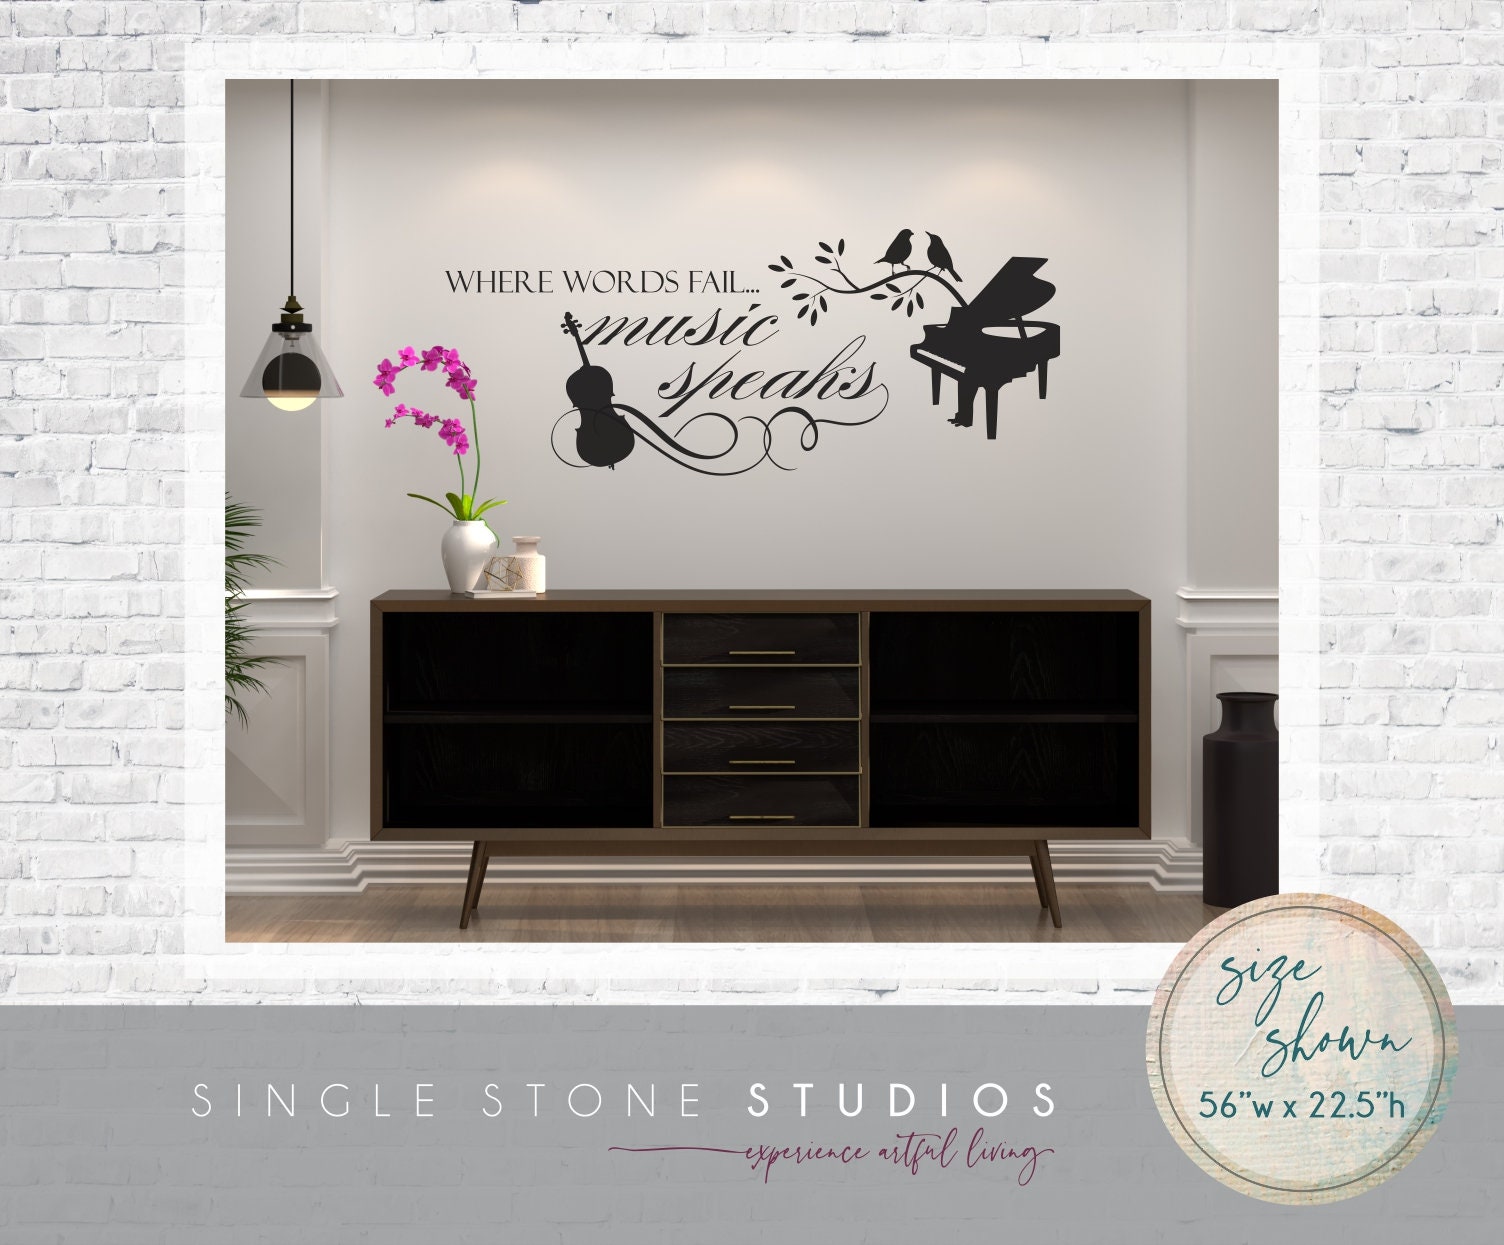 CLASSY FABULOUS WALL QUOTES WALL DECAL STICKERS WALL ART QUOTE